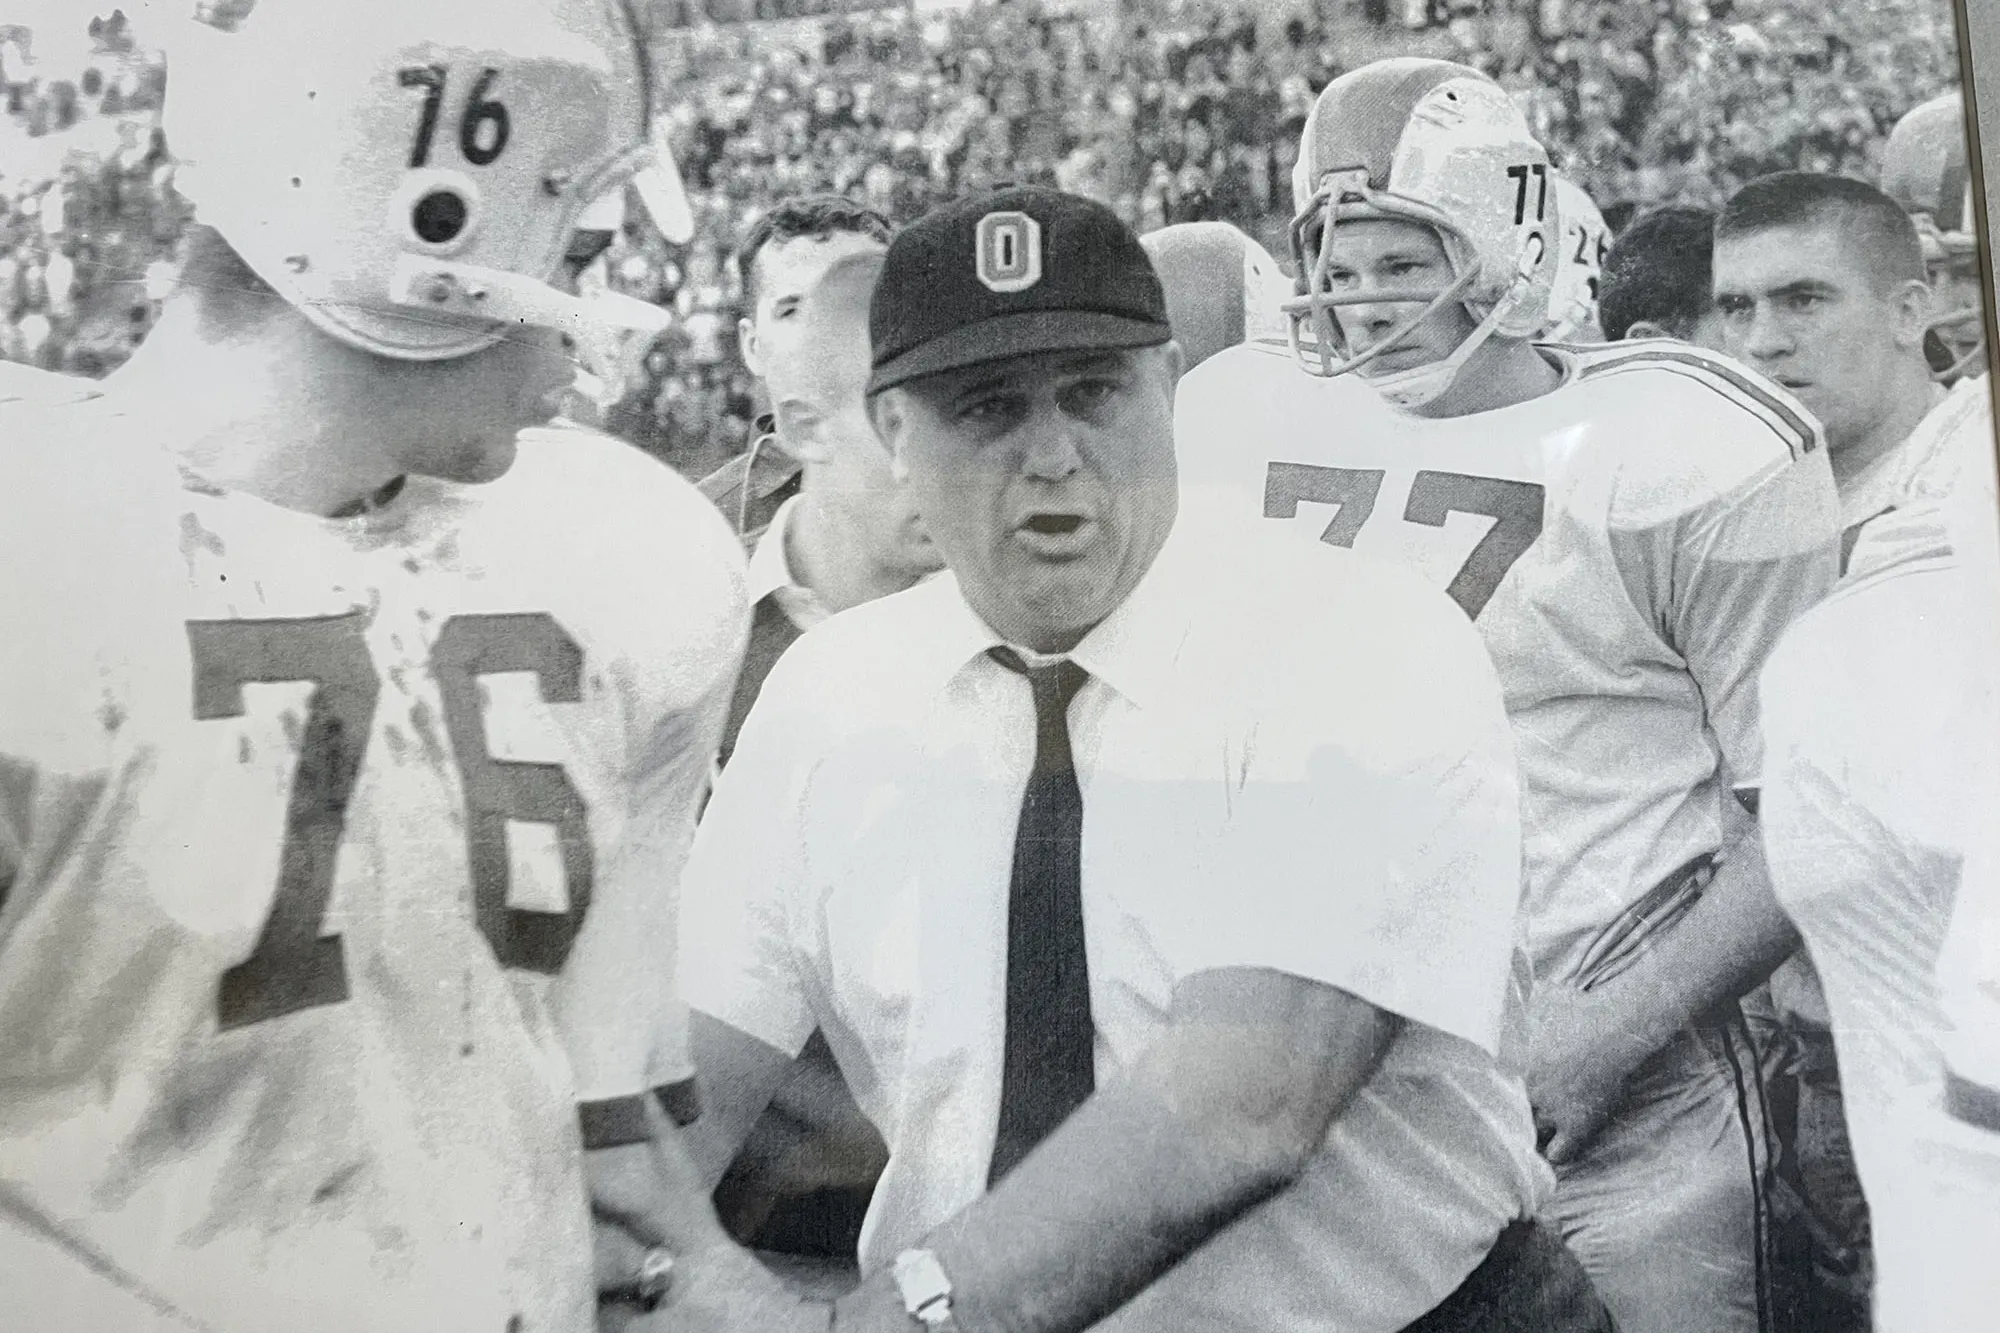 On the sidelines of a football game, famous Ohio State coach Woody Hayes holds the arm of a football player he’s talking to. The player watches him, but he looks straight ahead. Behind them, the player featured in this story intently watches something on the field.